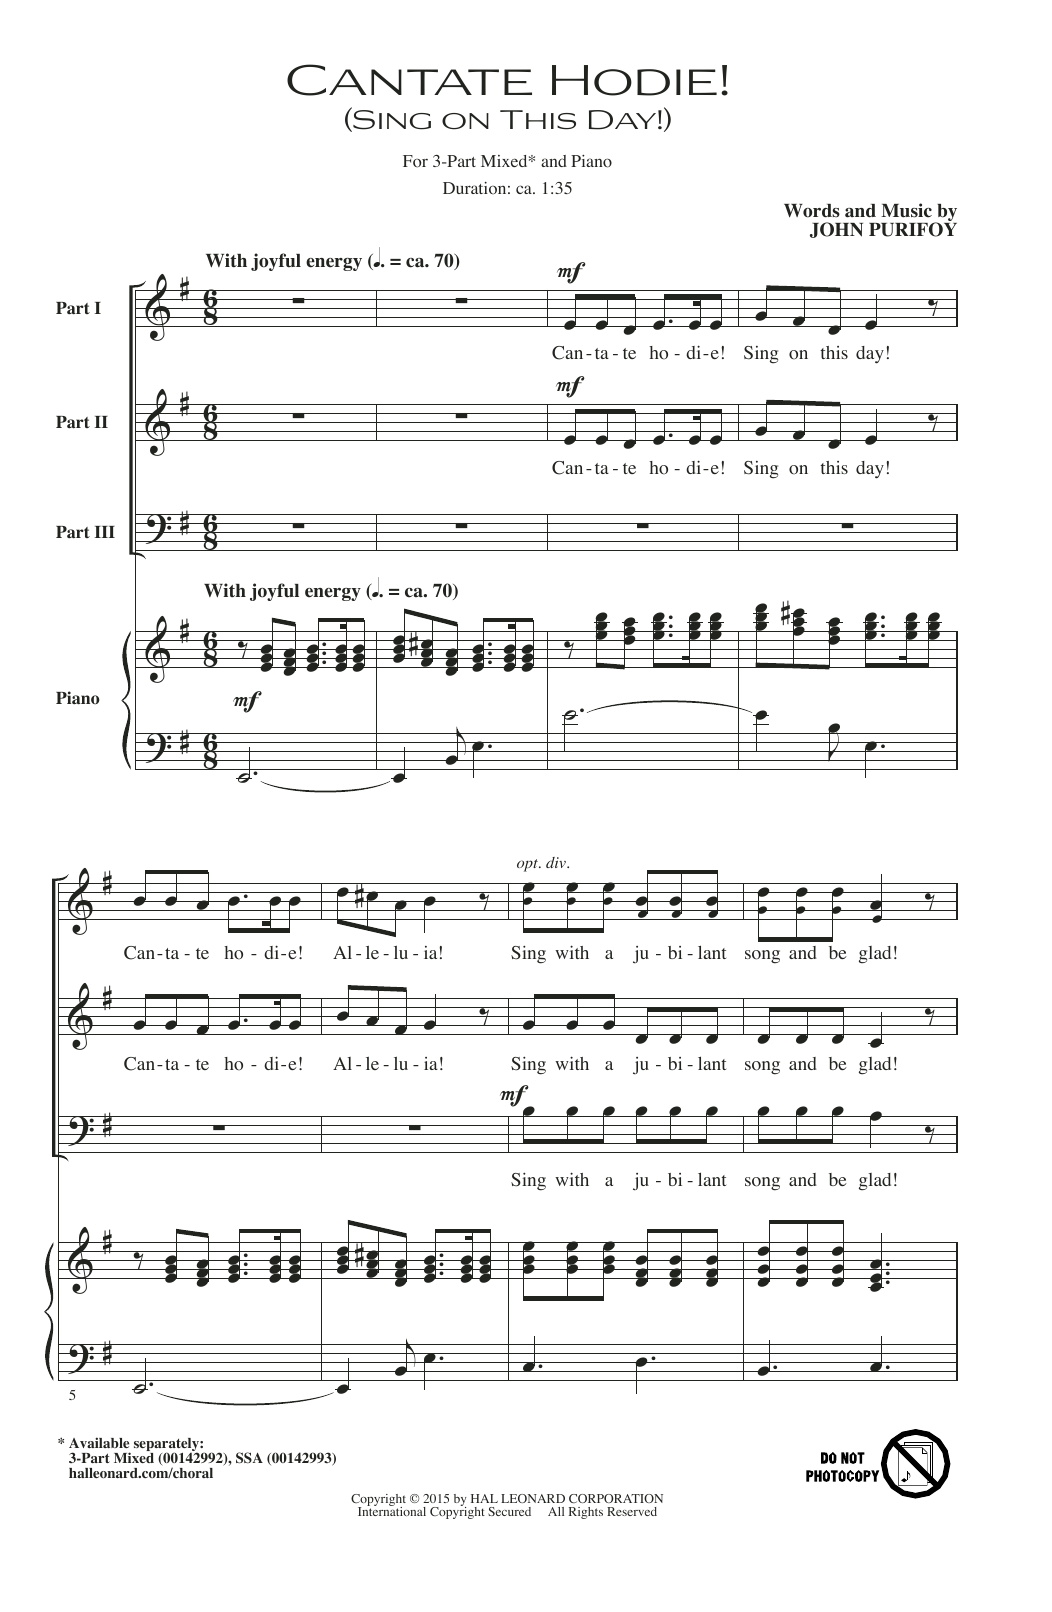 Download John Purifoy Cantate Hodie! (Sing On This Day) Sheet Music